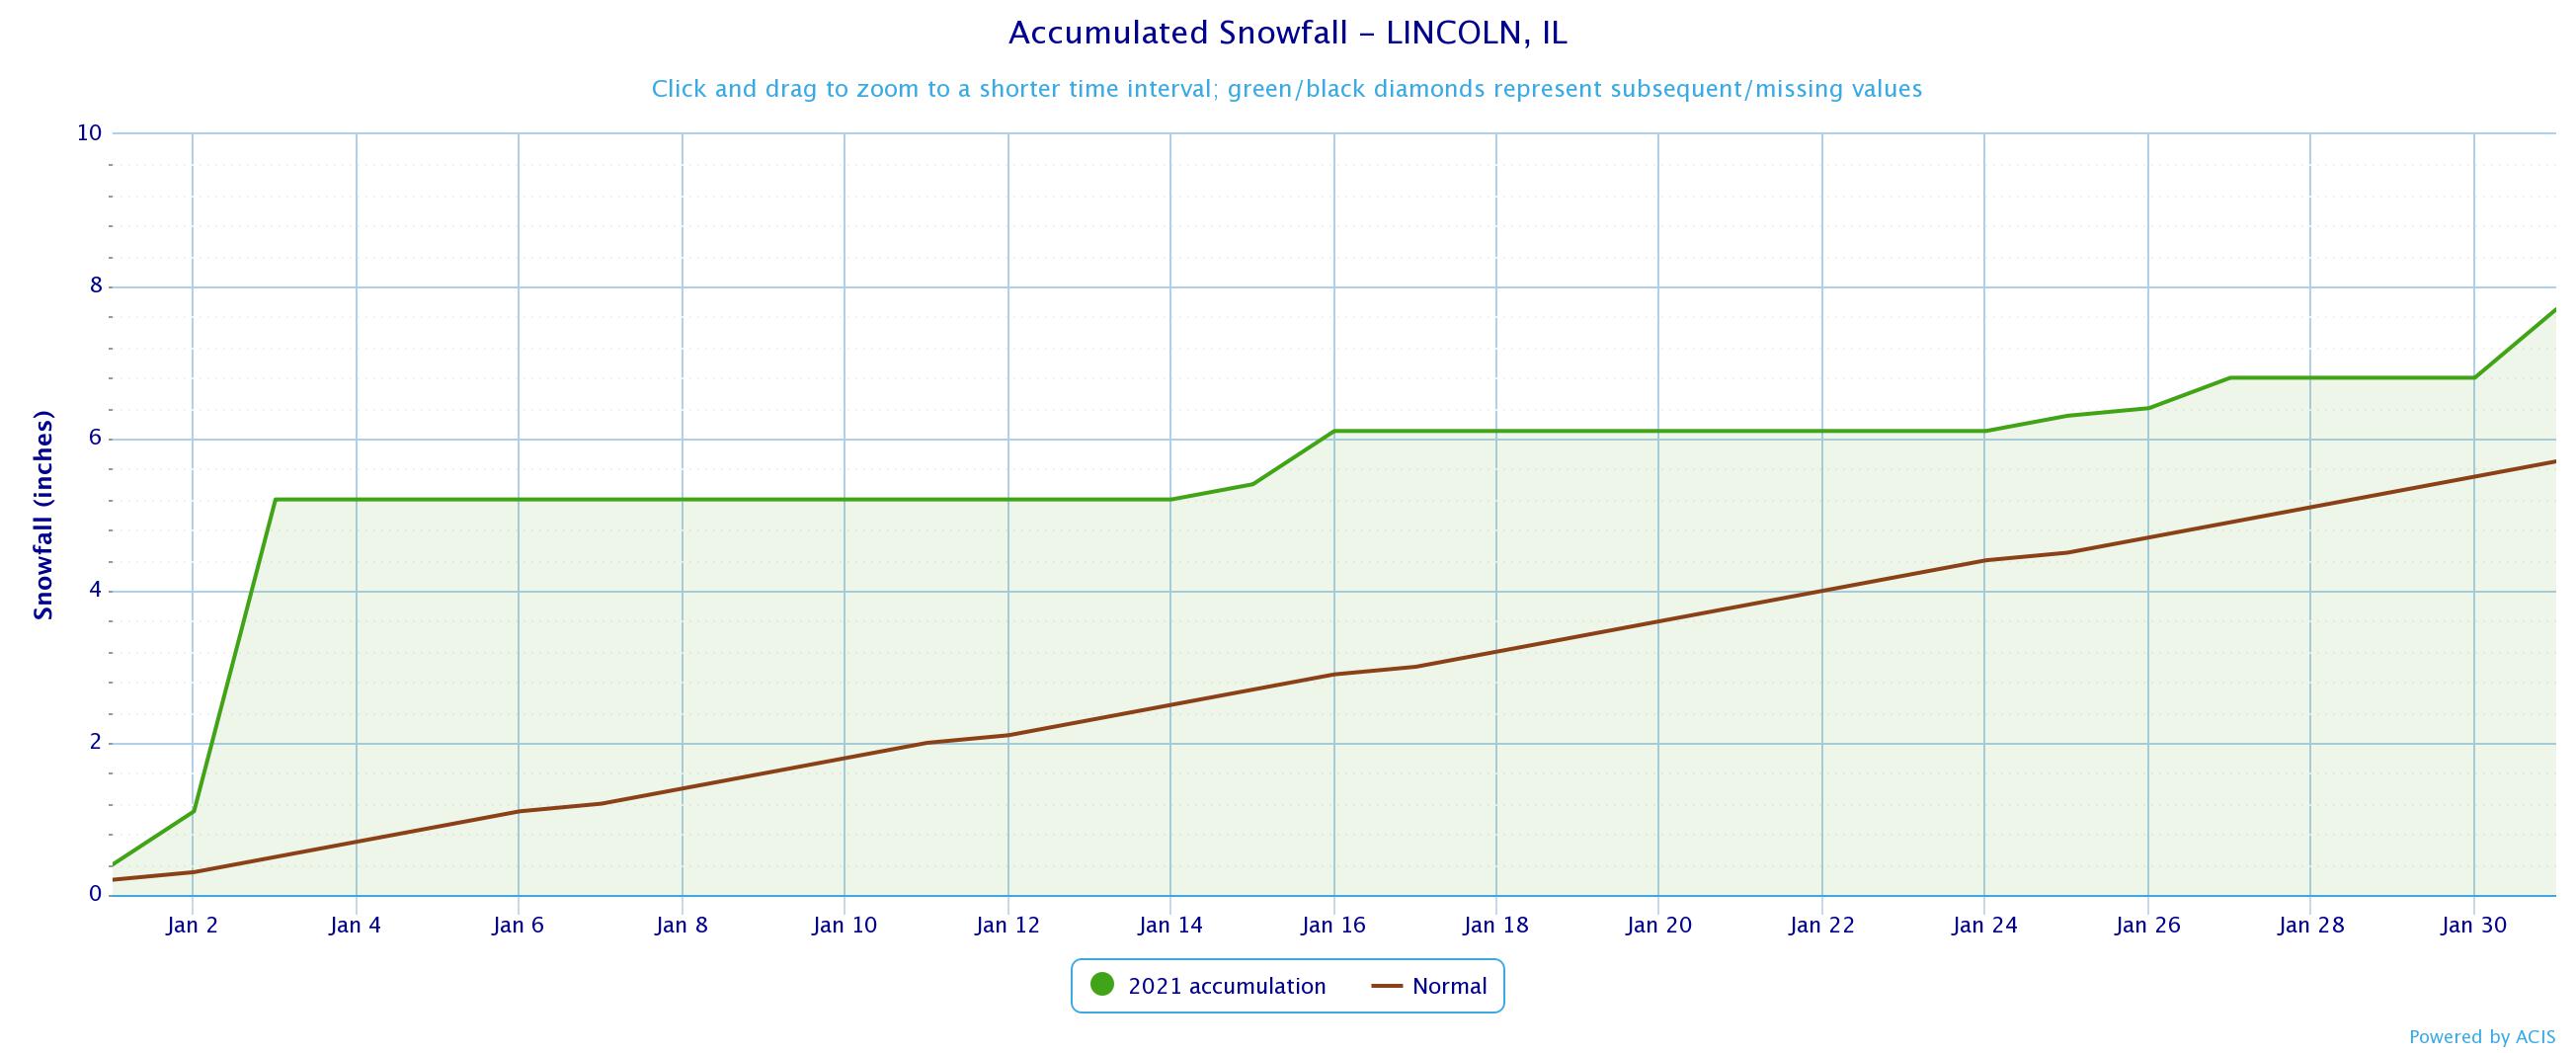 Lincoln snowfall trends